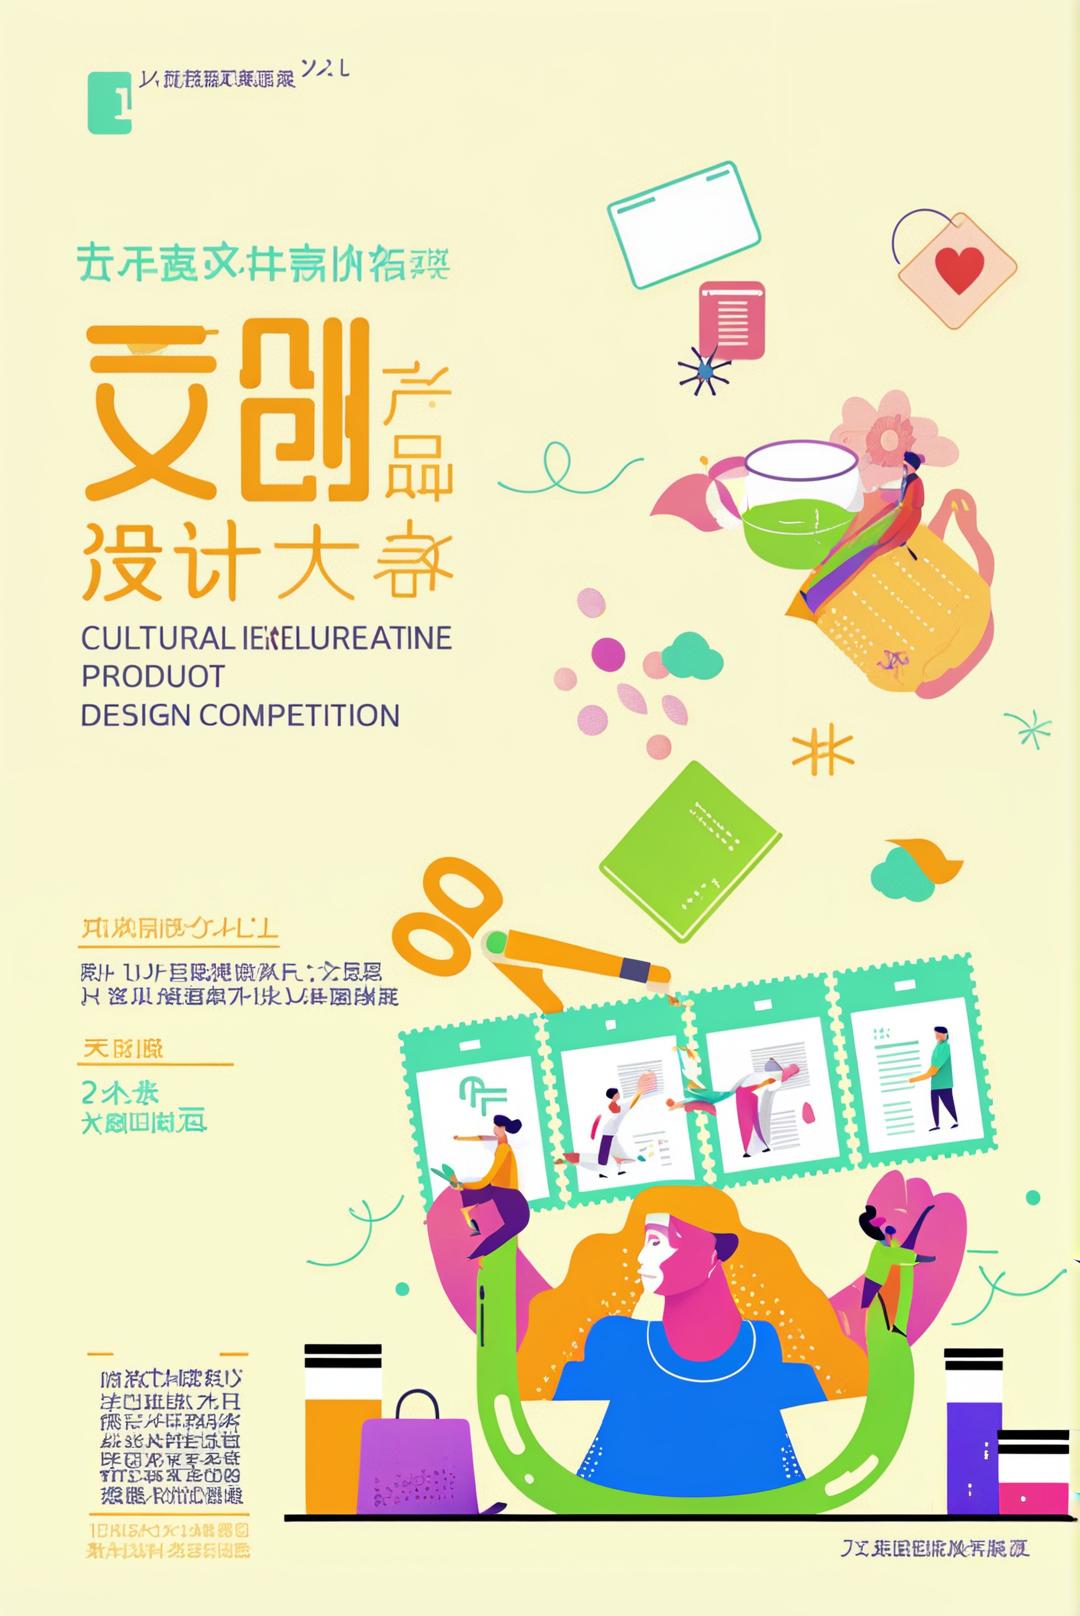  The theme is "cleanliness, health, friendliness and self-discipline".



 2. The works can be fully and clearly expressed. The design contains community cultural elements or background, reflecting the inheritance and integration of community culture. There is a high correlation between design and theme content.



 3. The performance of the works conforms to the mainstream aesthetics of the society, and the value-oriented good works are innovative in content, ingenious in conception, and unique in personal style.